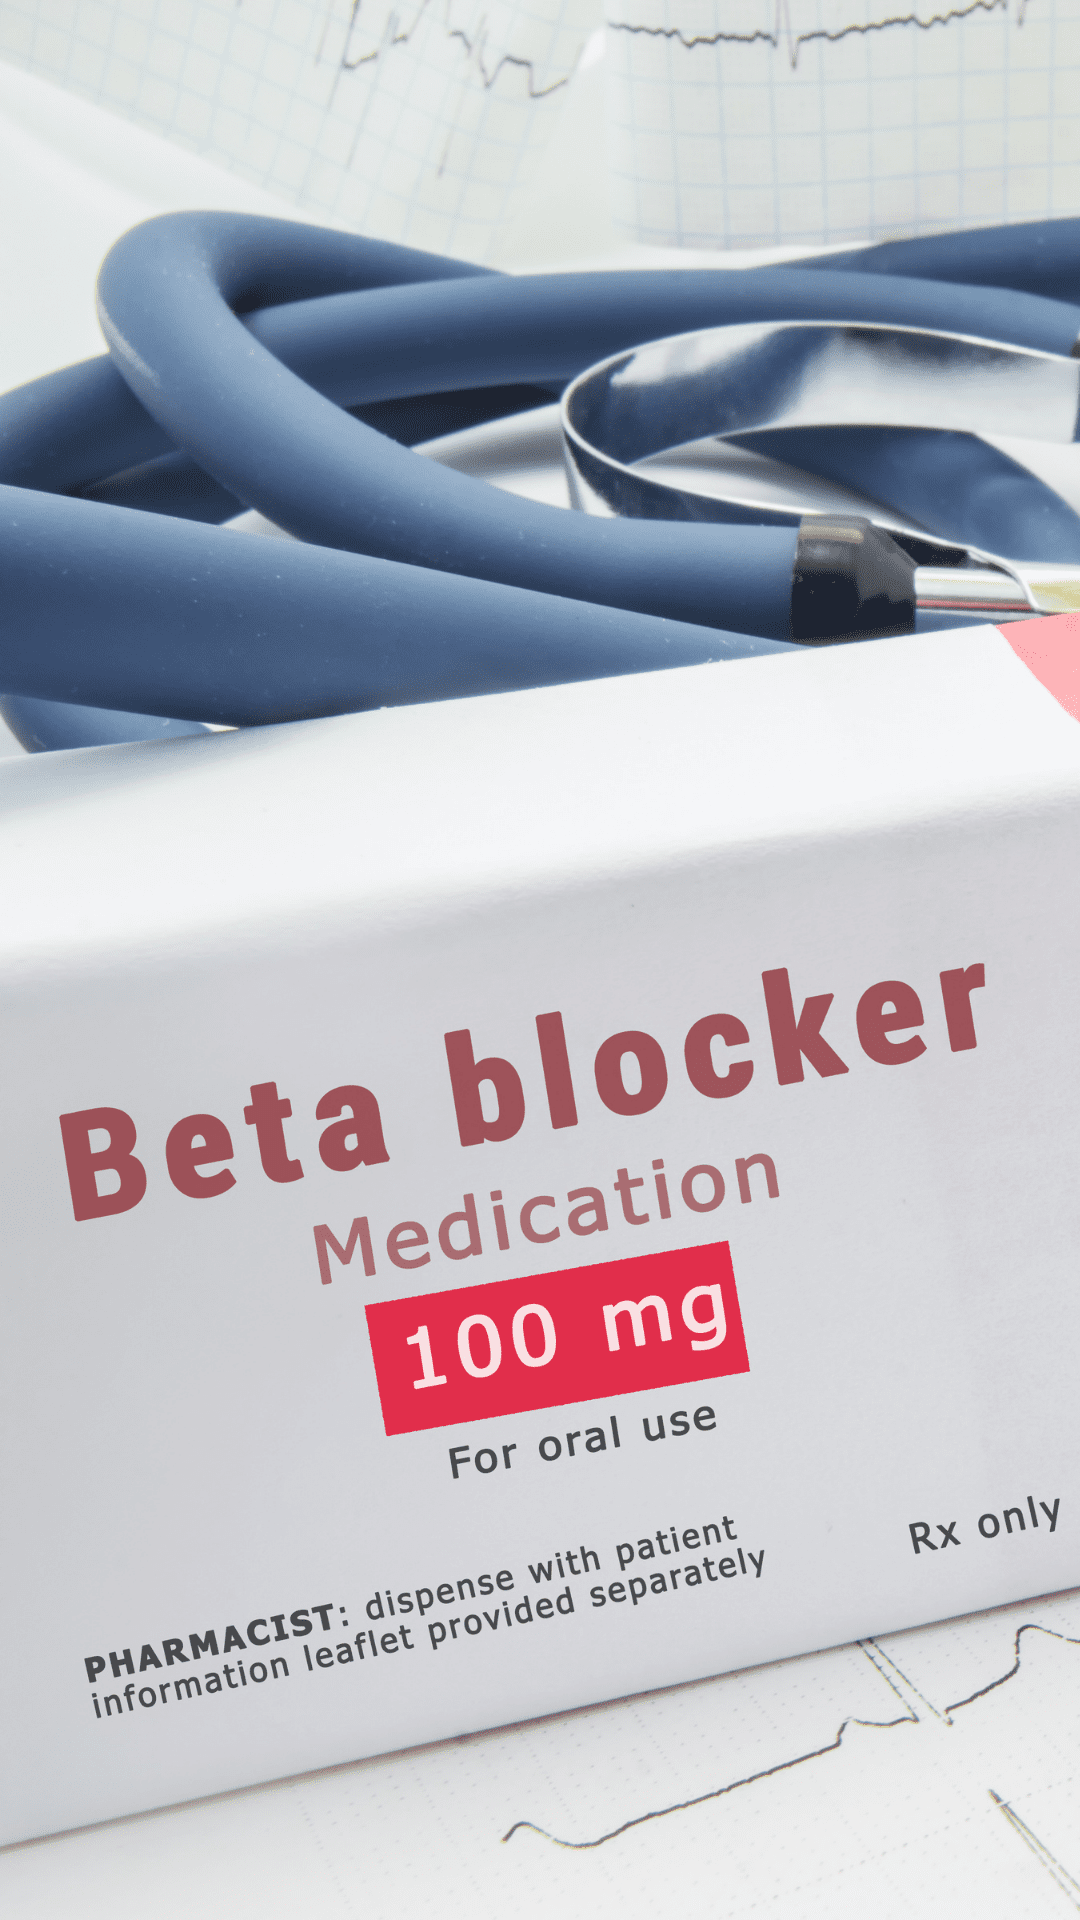 Different beta blocker medication has a negative impact and causes hair loss